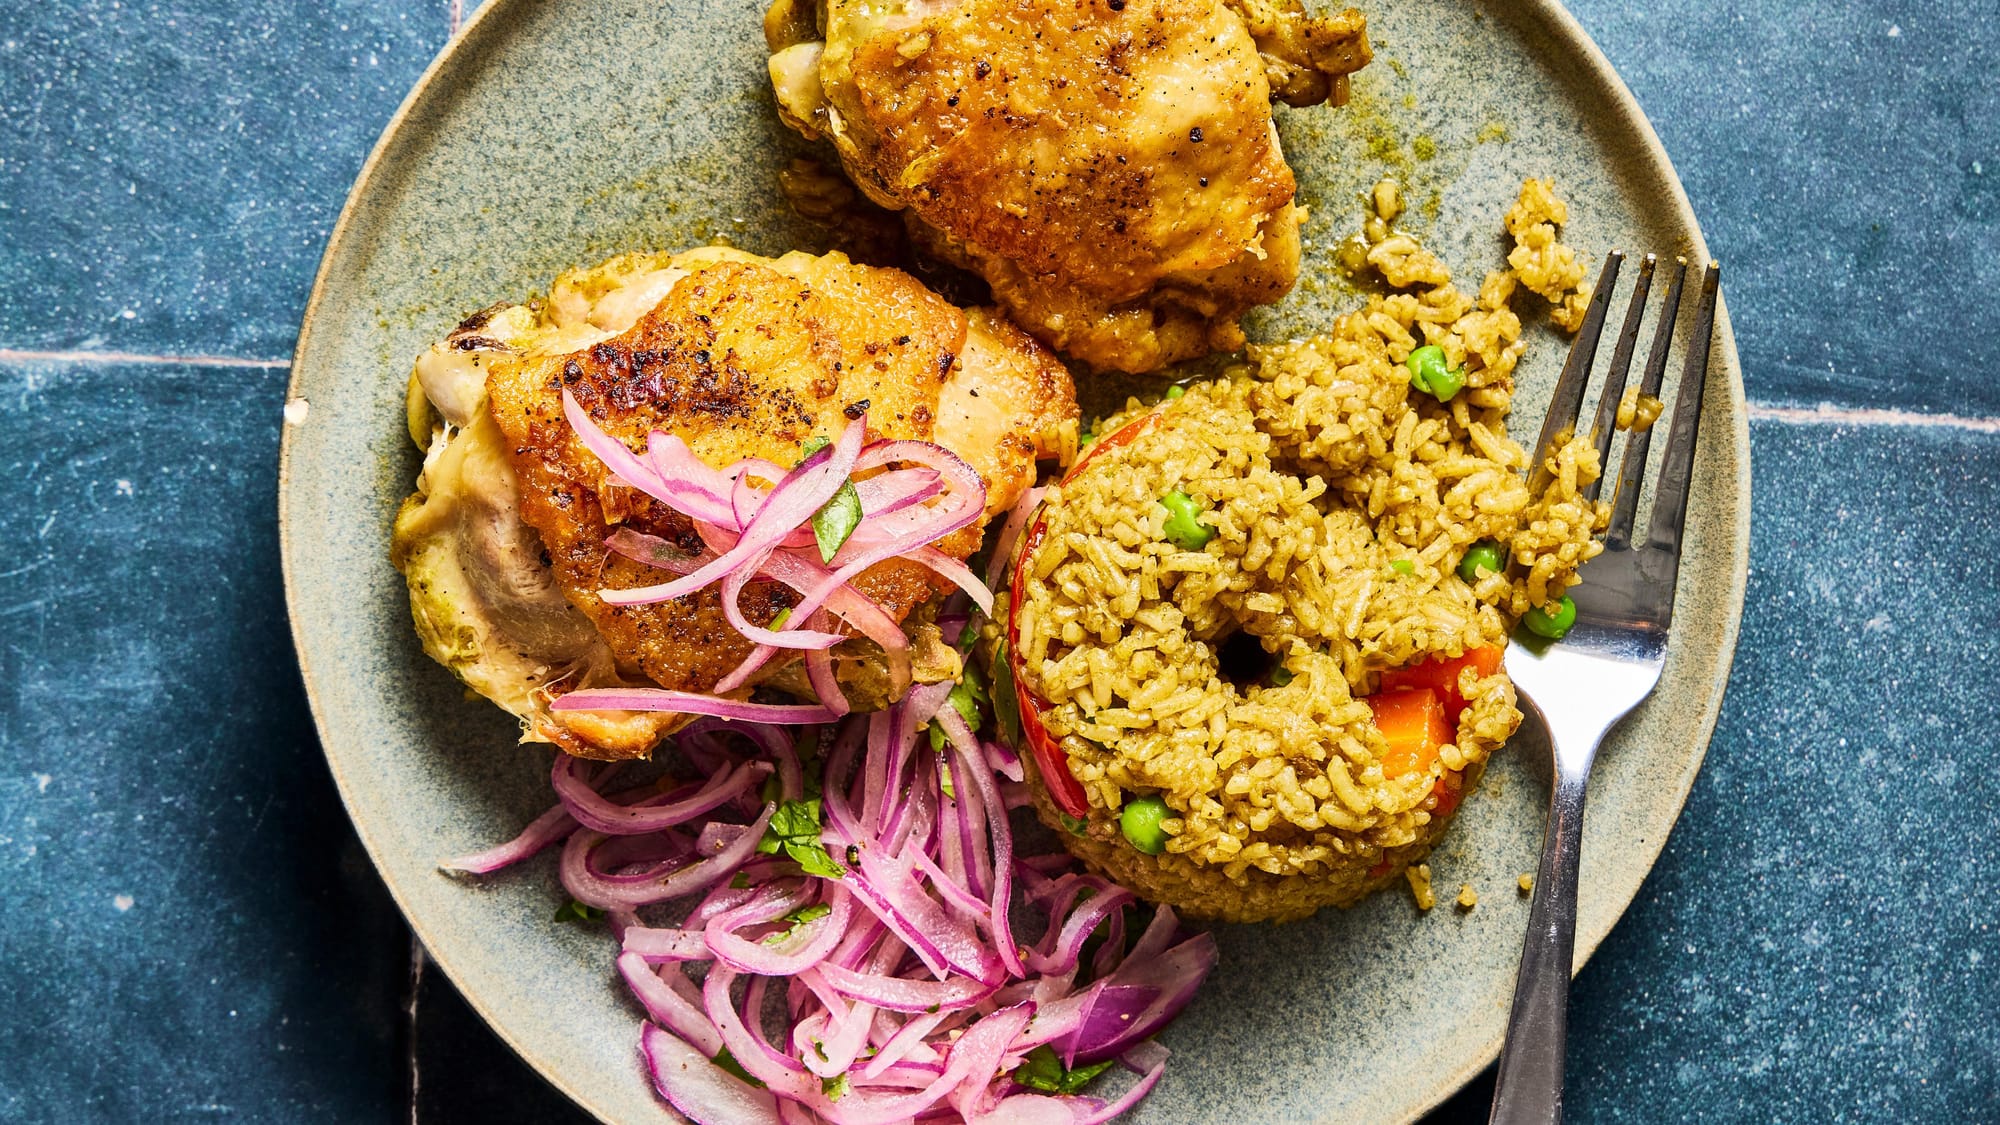 Peruvian rice and chicken shines bright with flavour and practicality